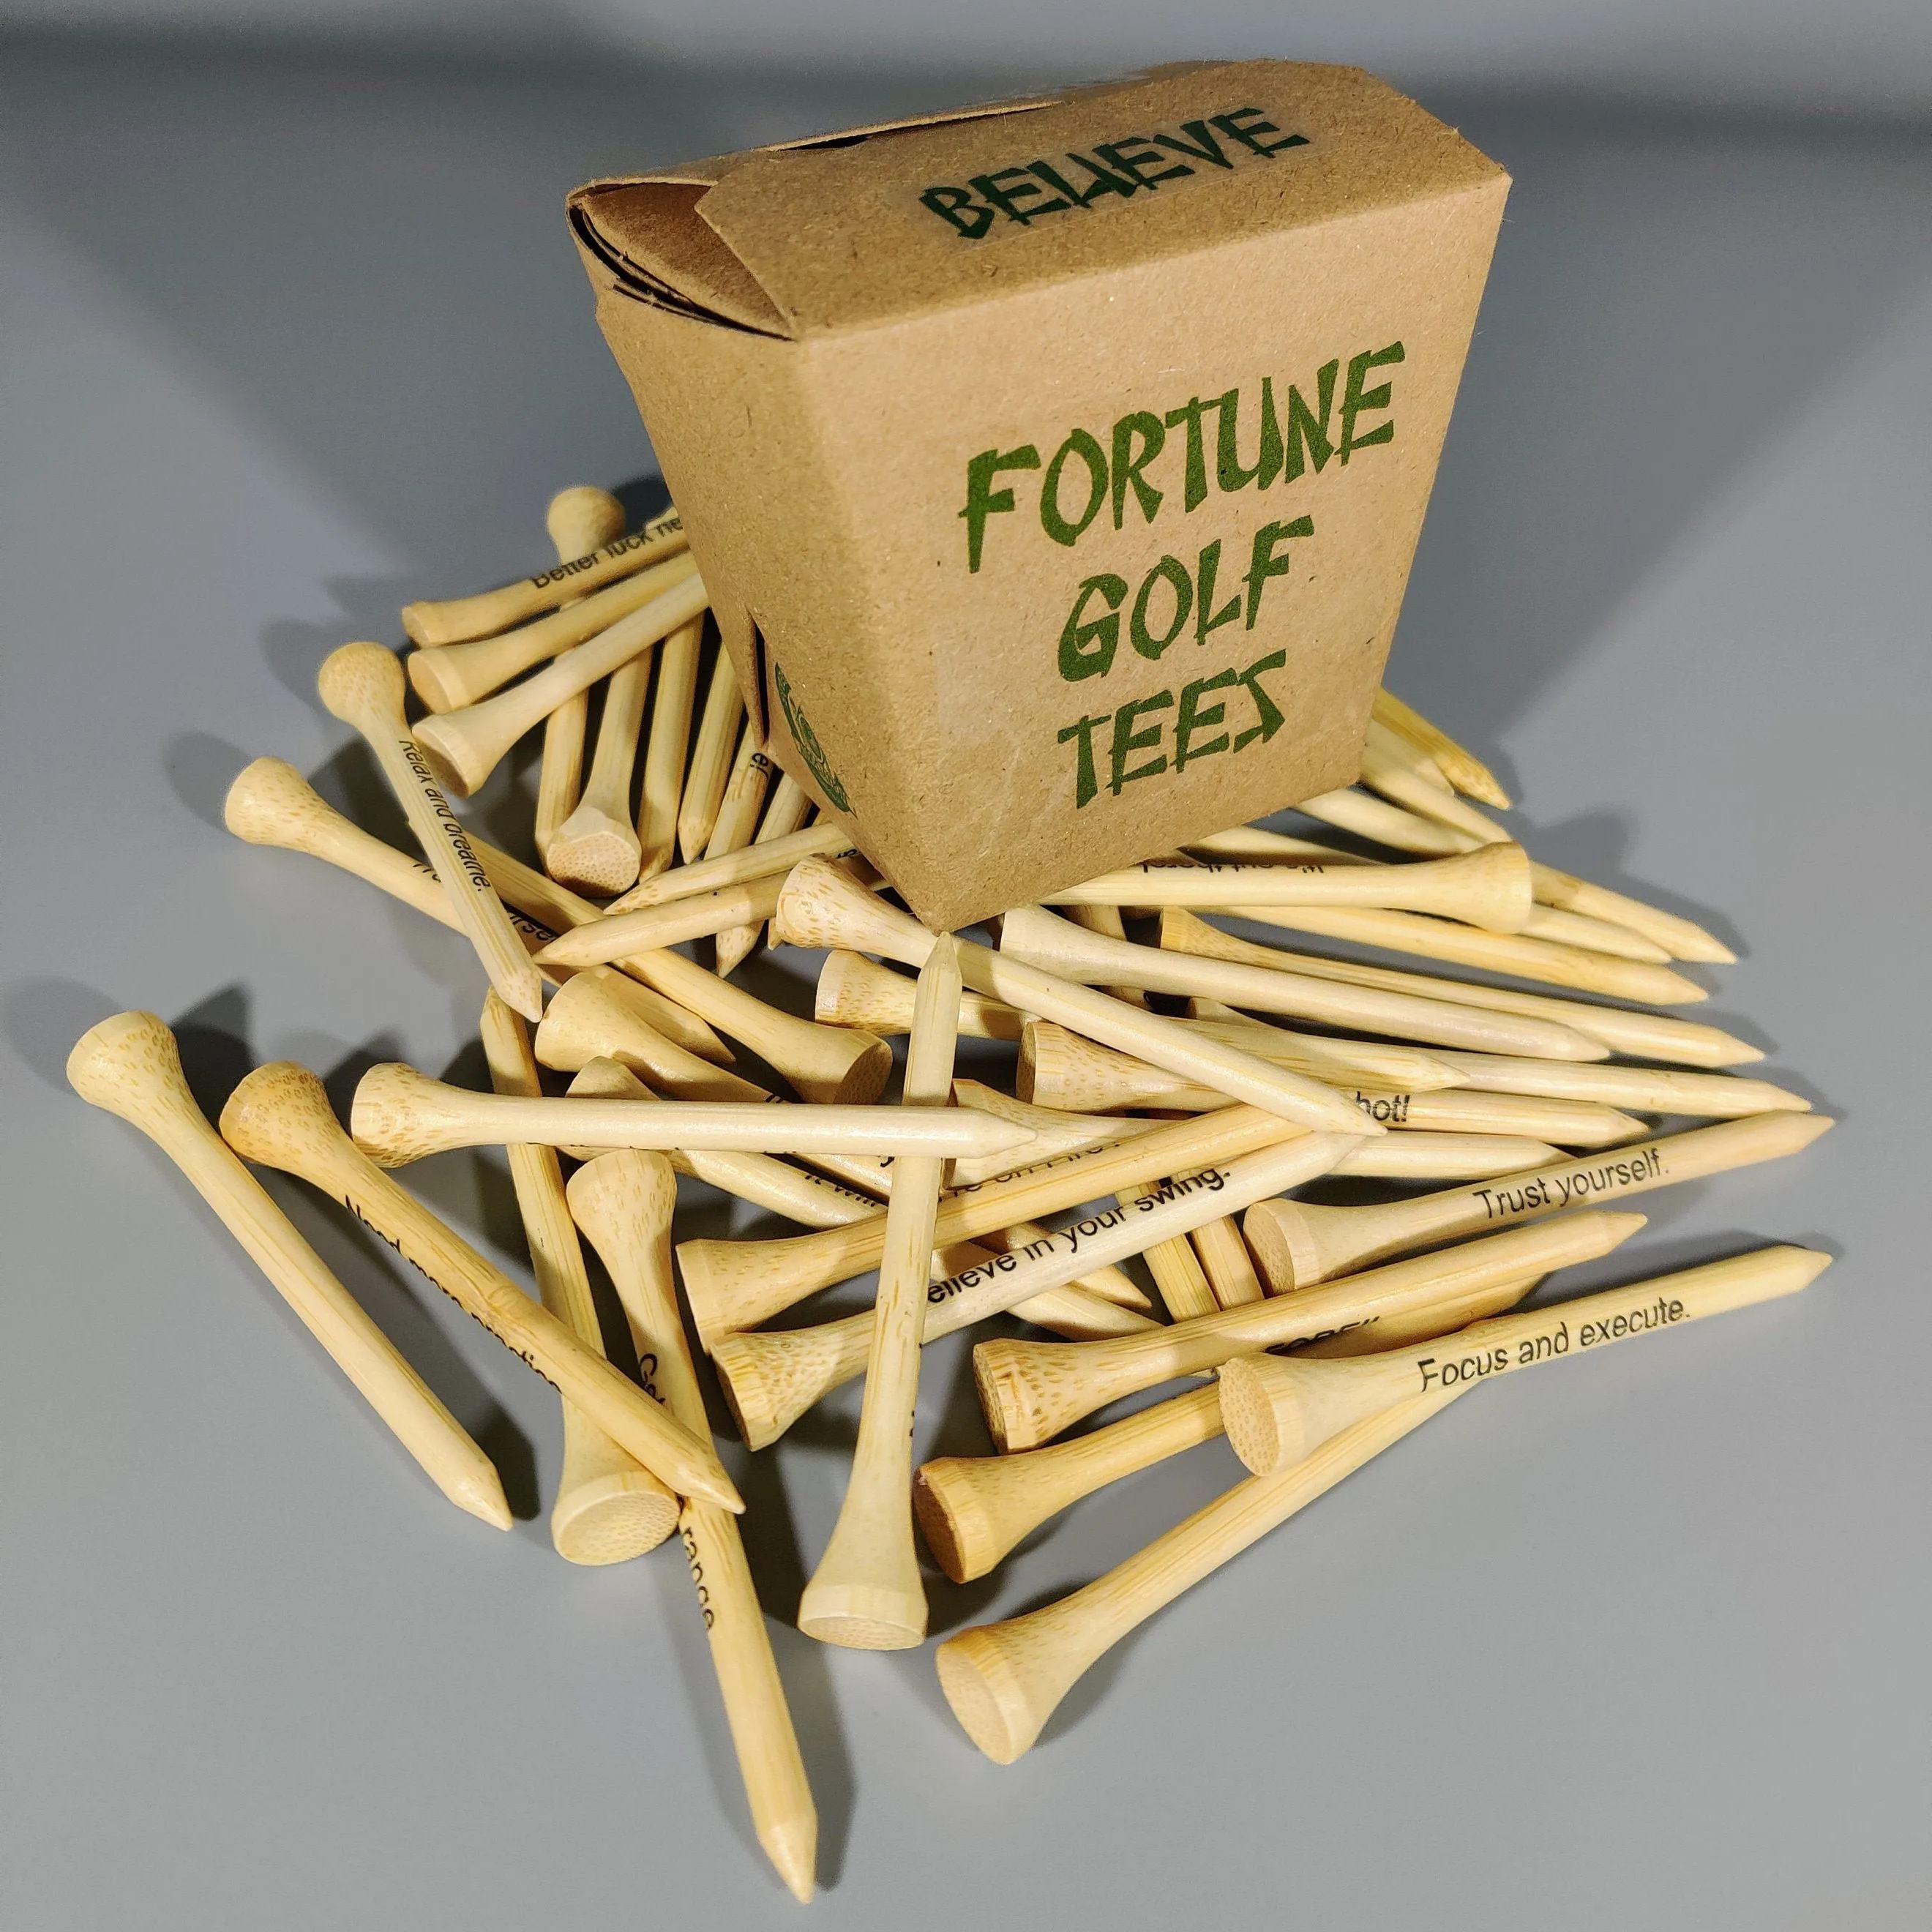 Fortune Golf Tees